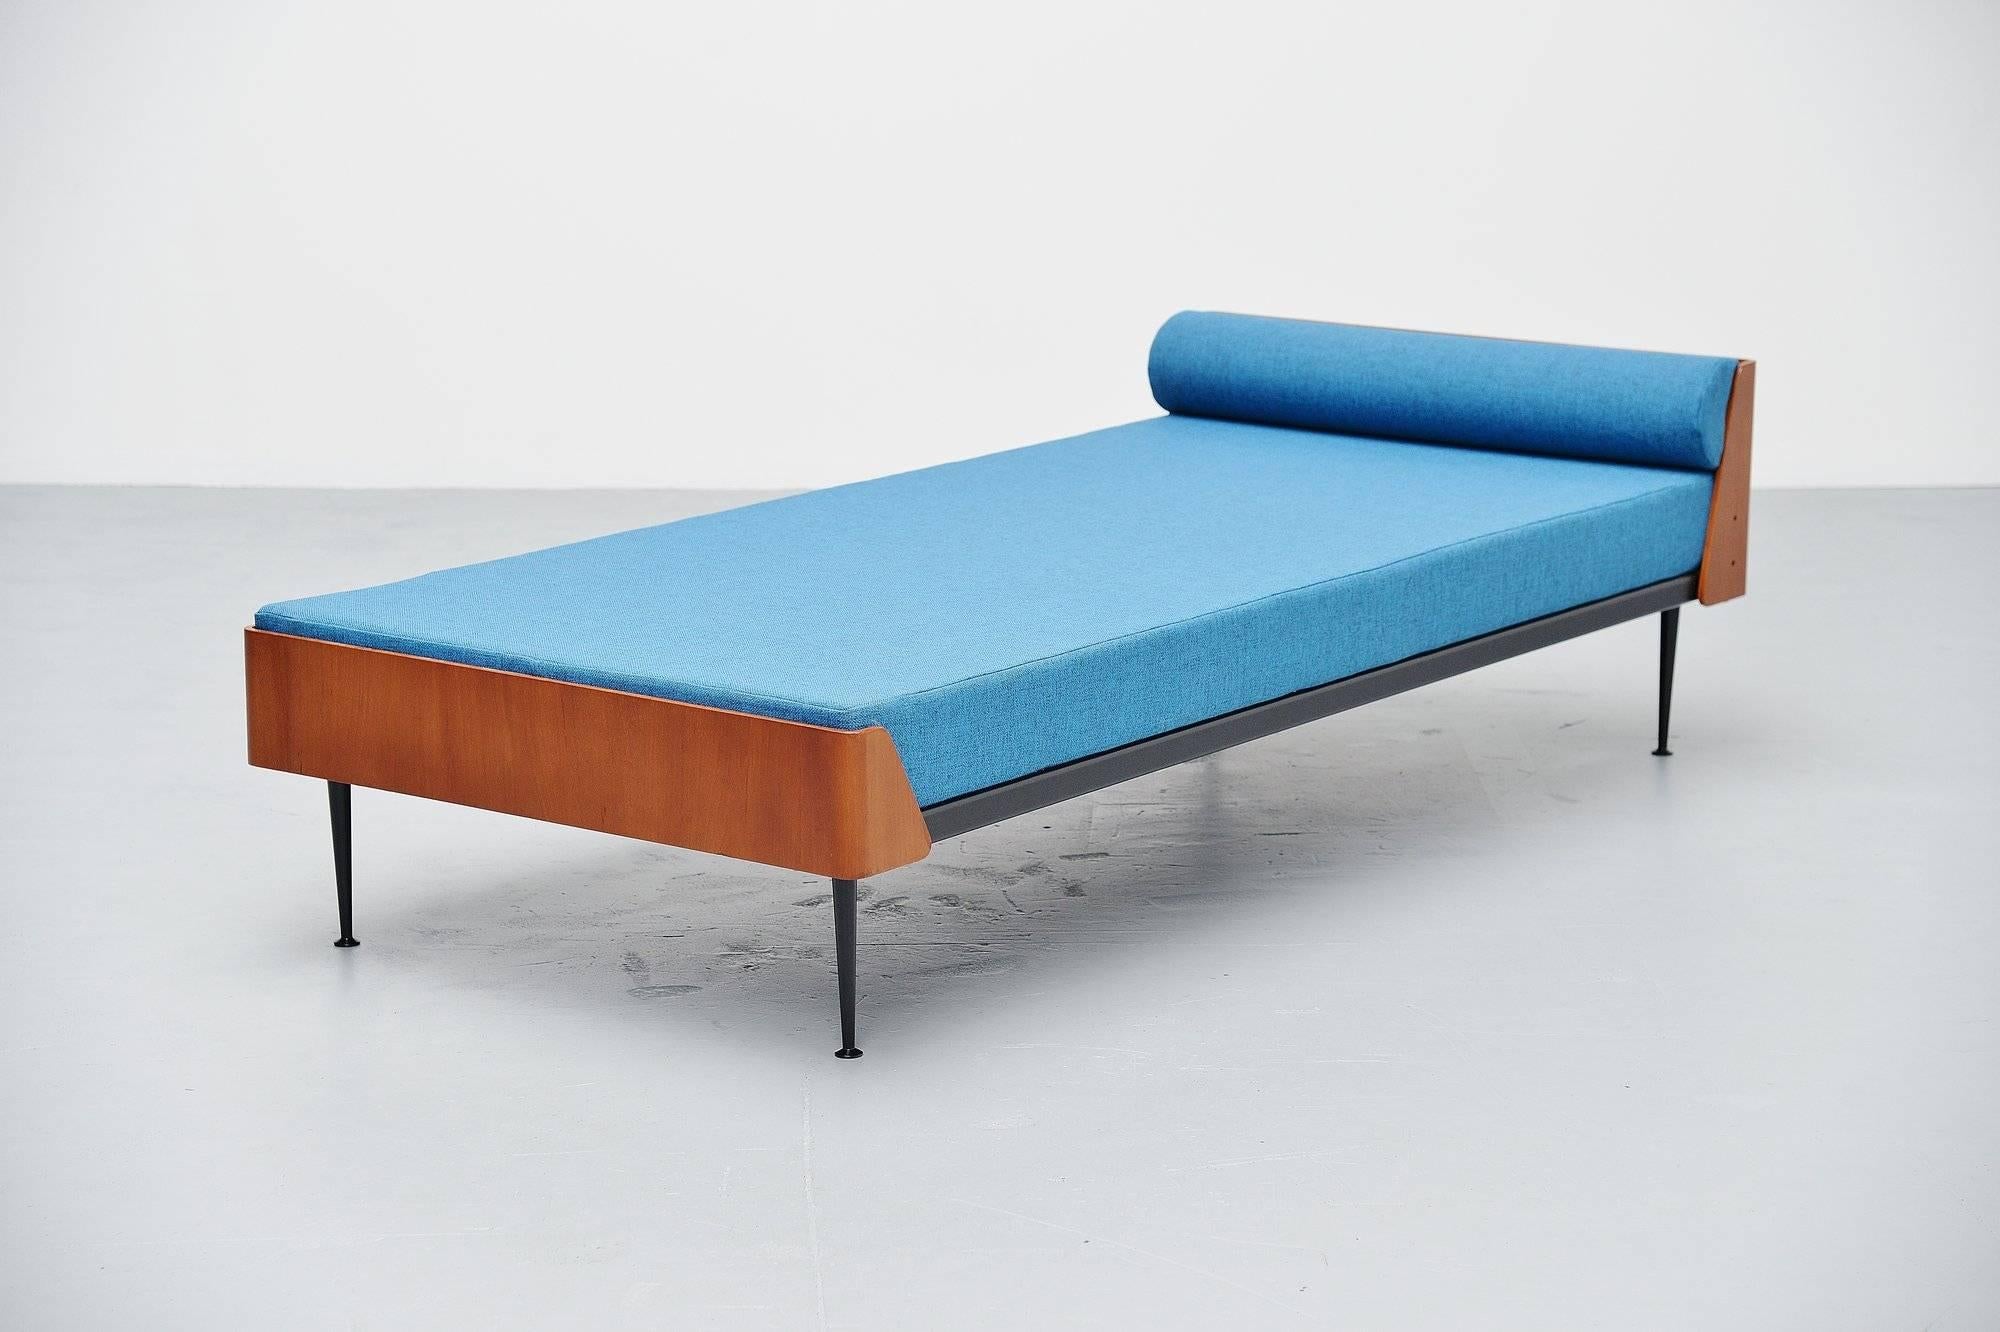 Very nice daybed designed by Friso Kramer for Auping, Holland 1963. This bed is from the Euroika series designed by Friso Kramer in 1963. The Euroika series had a bed, bed cabinets, table, chair, mirror and a toilet cabinet. All items of this series